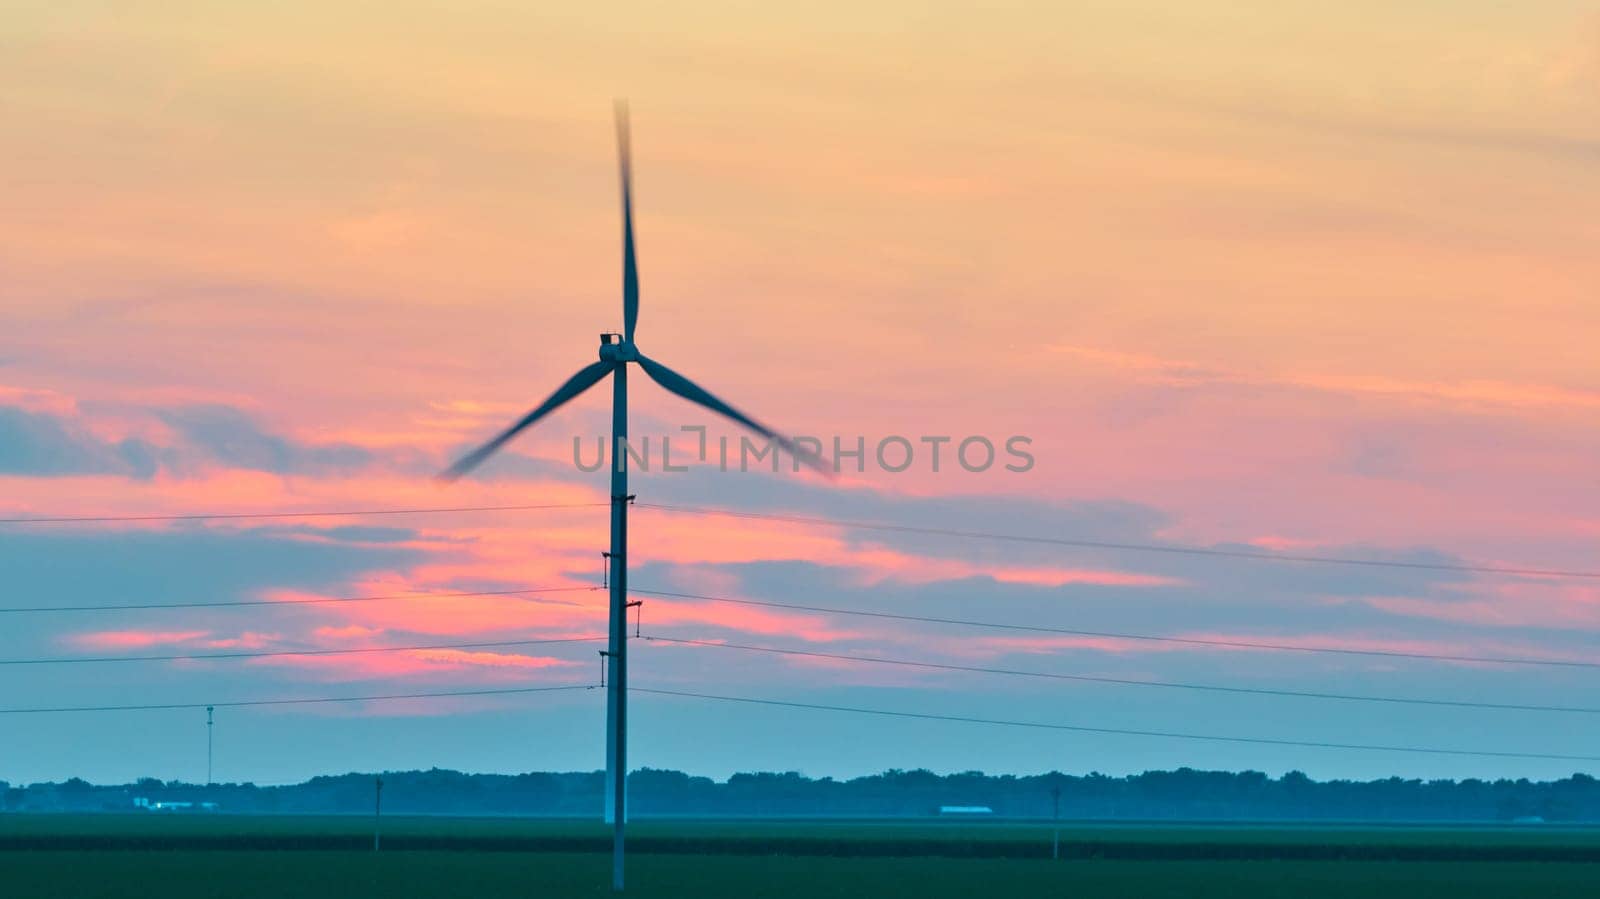 Image of Aerial spinning wind turbine at dusk with pink and blue clouds